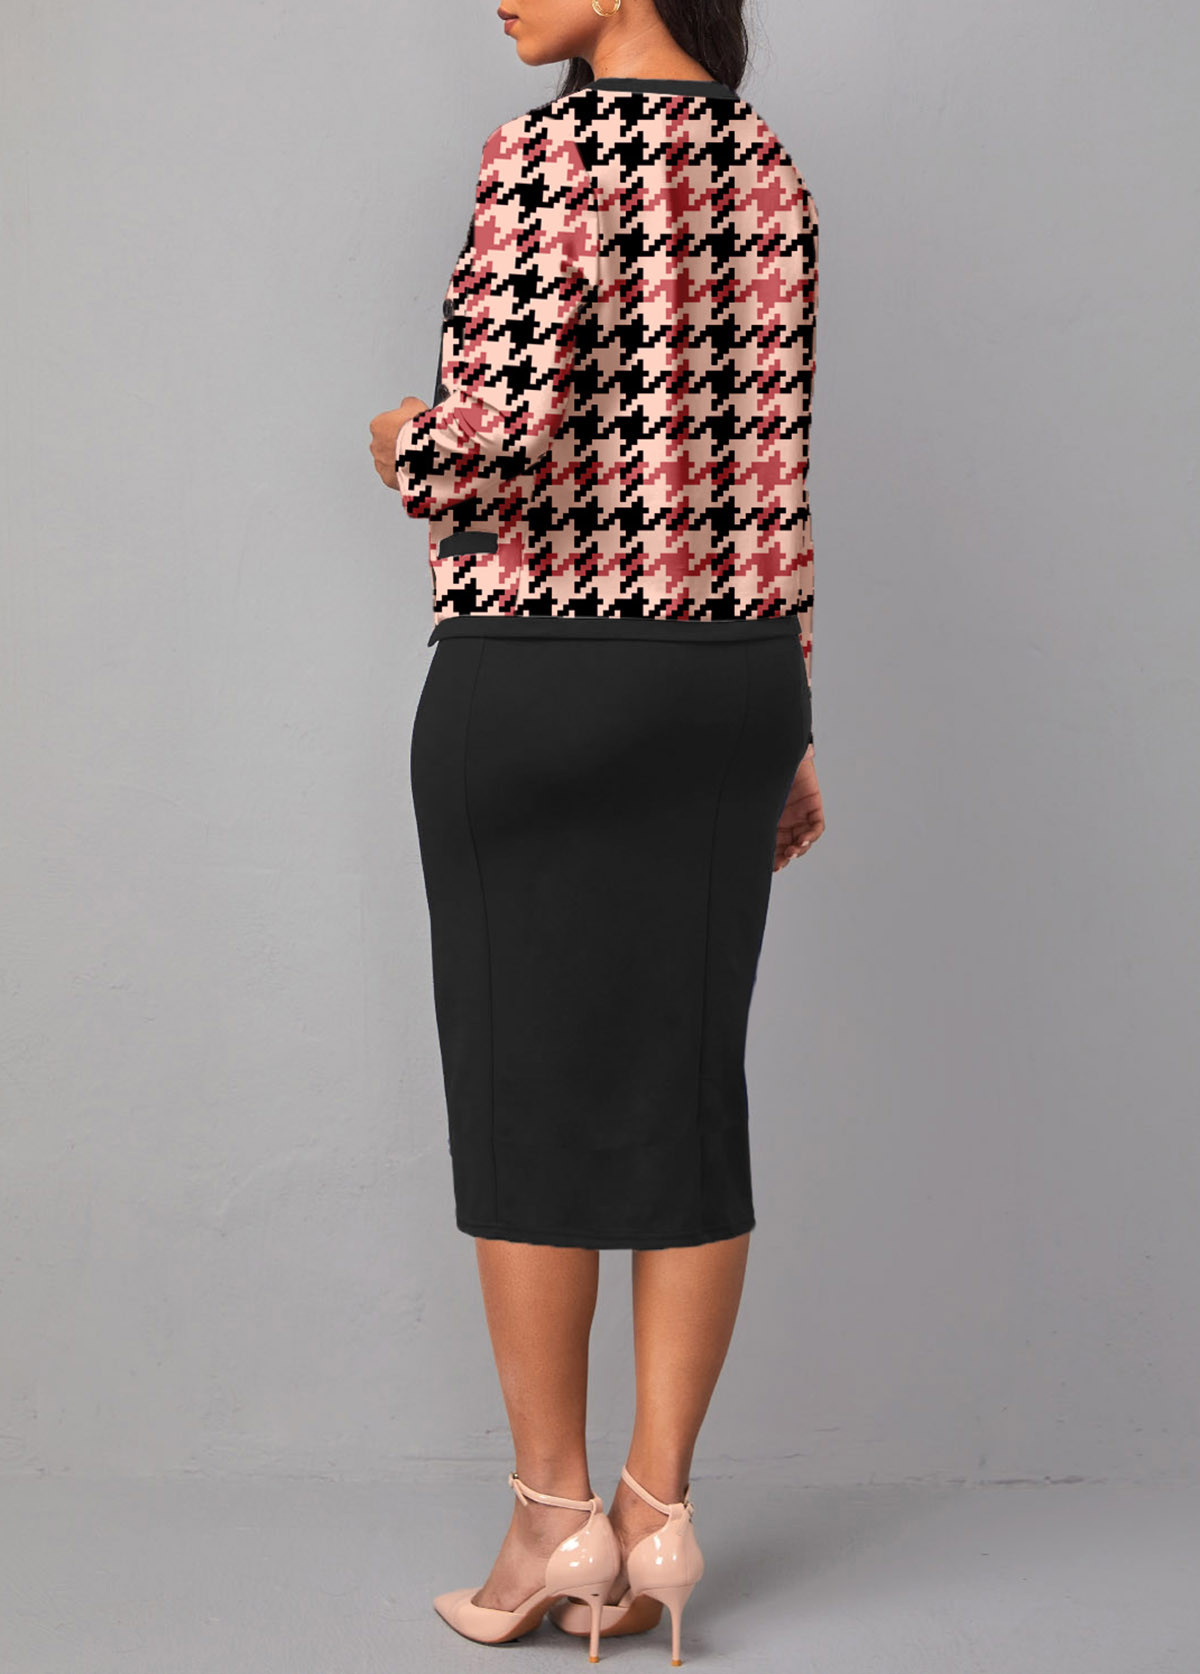 Houndstooth Print Two Piece Pink Dress and Cardigan